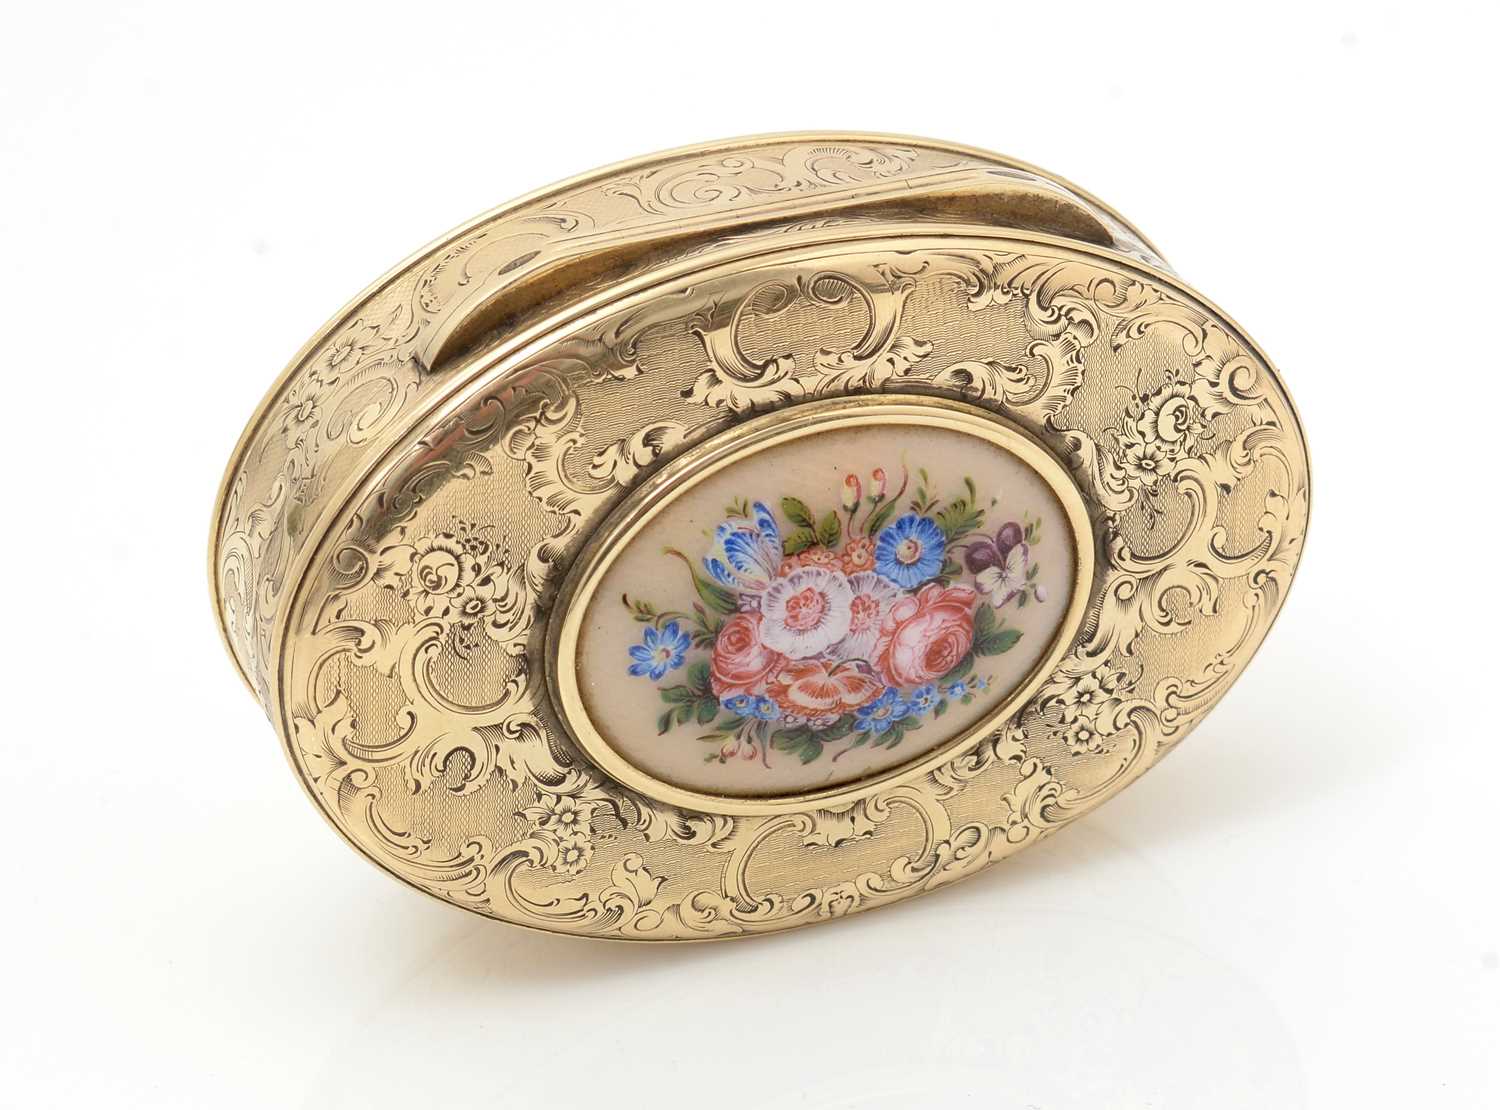 A mid 19th Century Continental silver-gilt snuff box. - Image 4 of 5